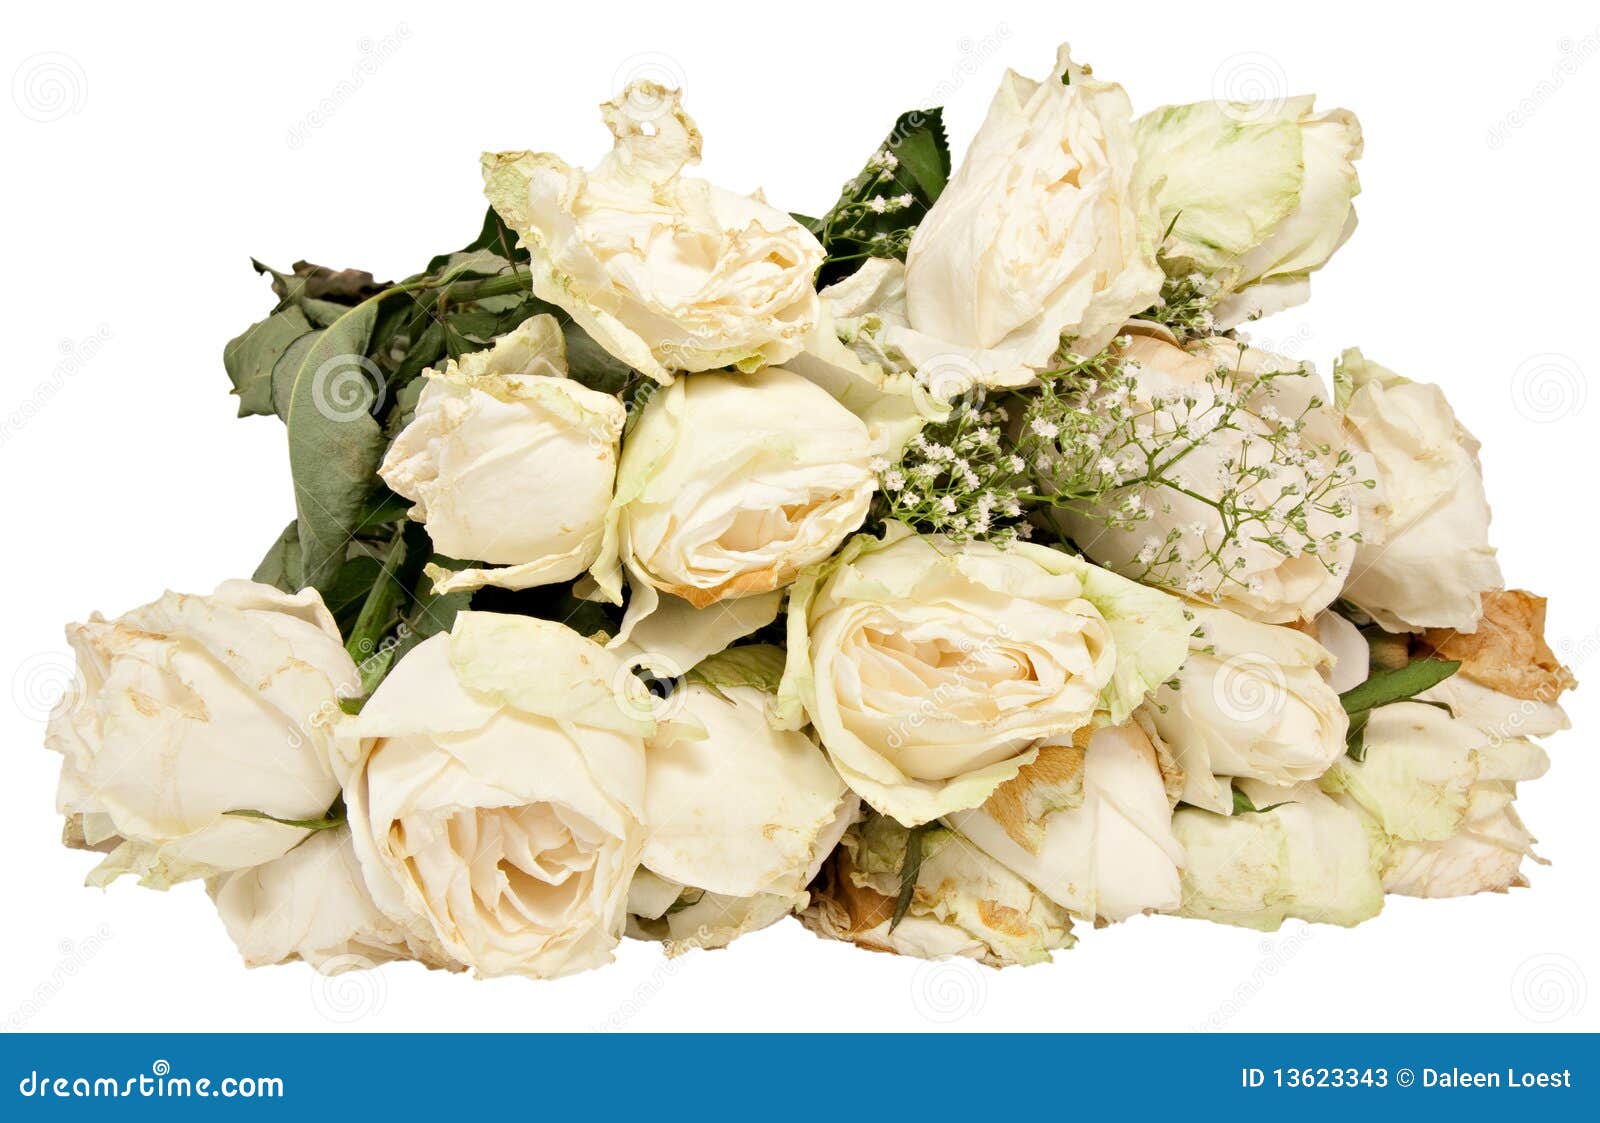 white wilted roses